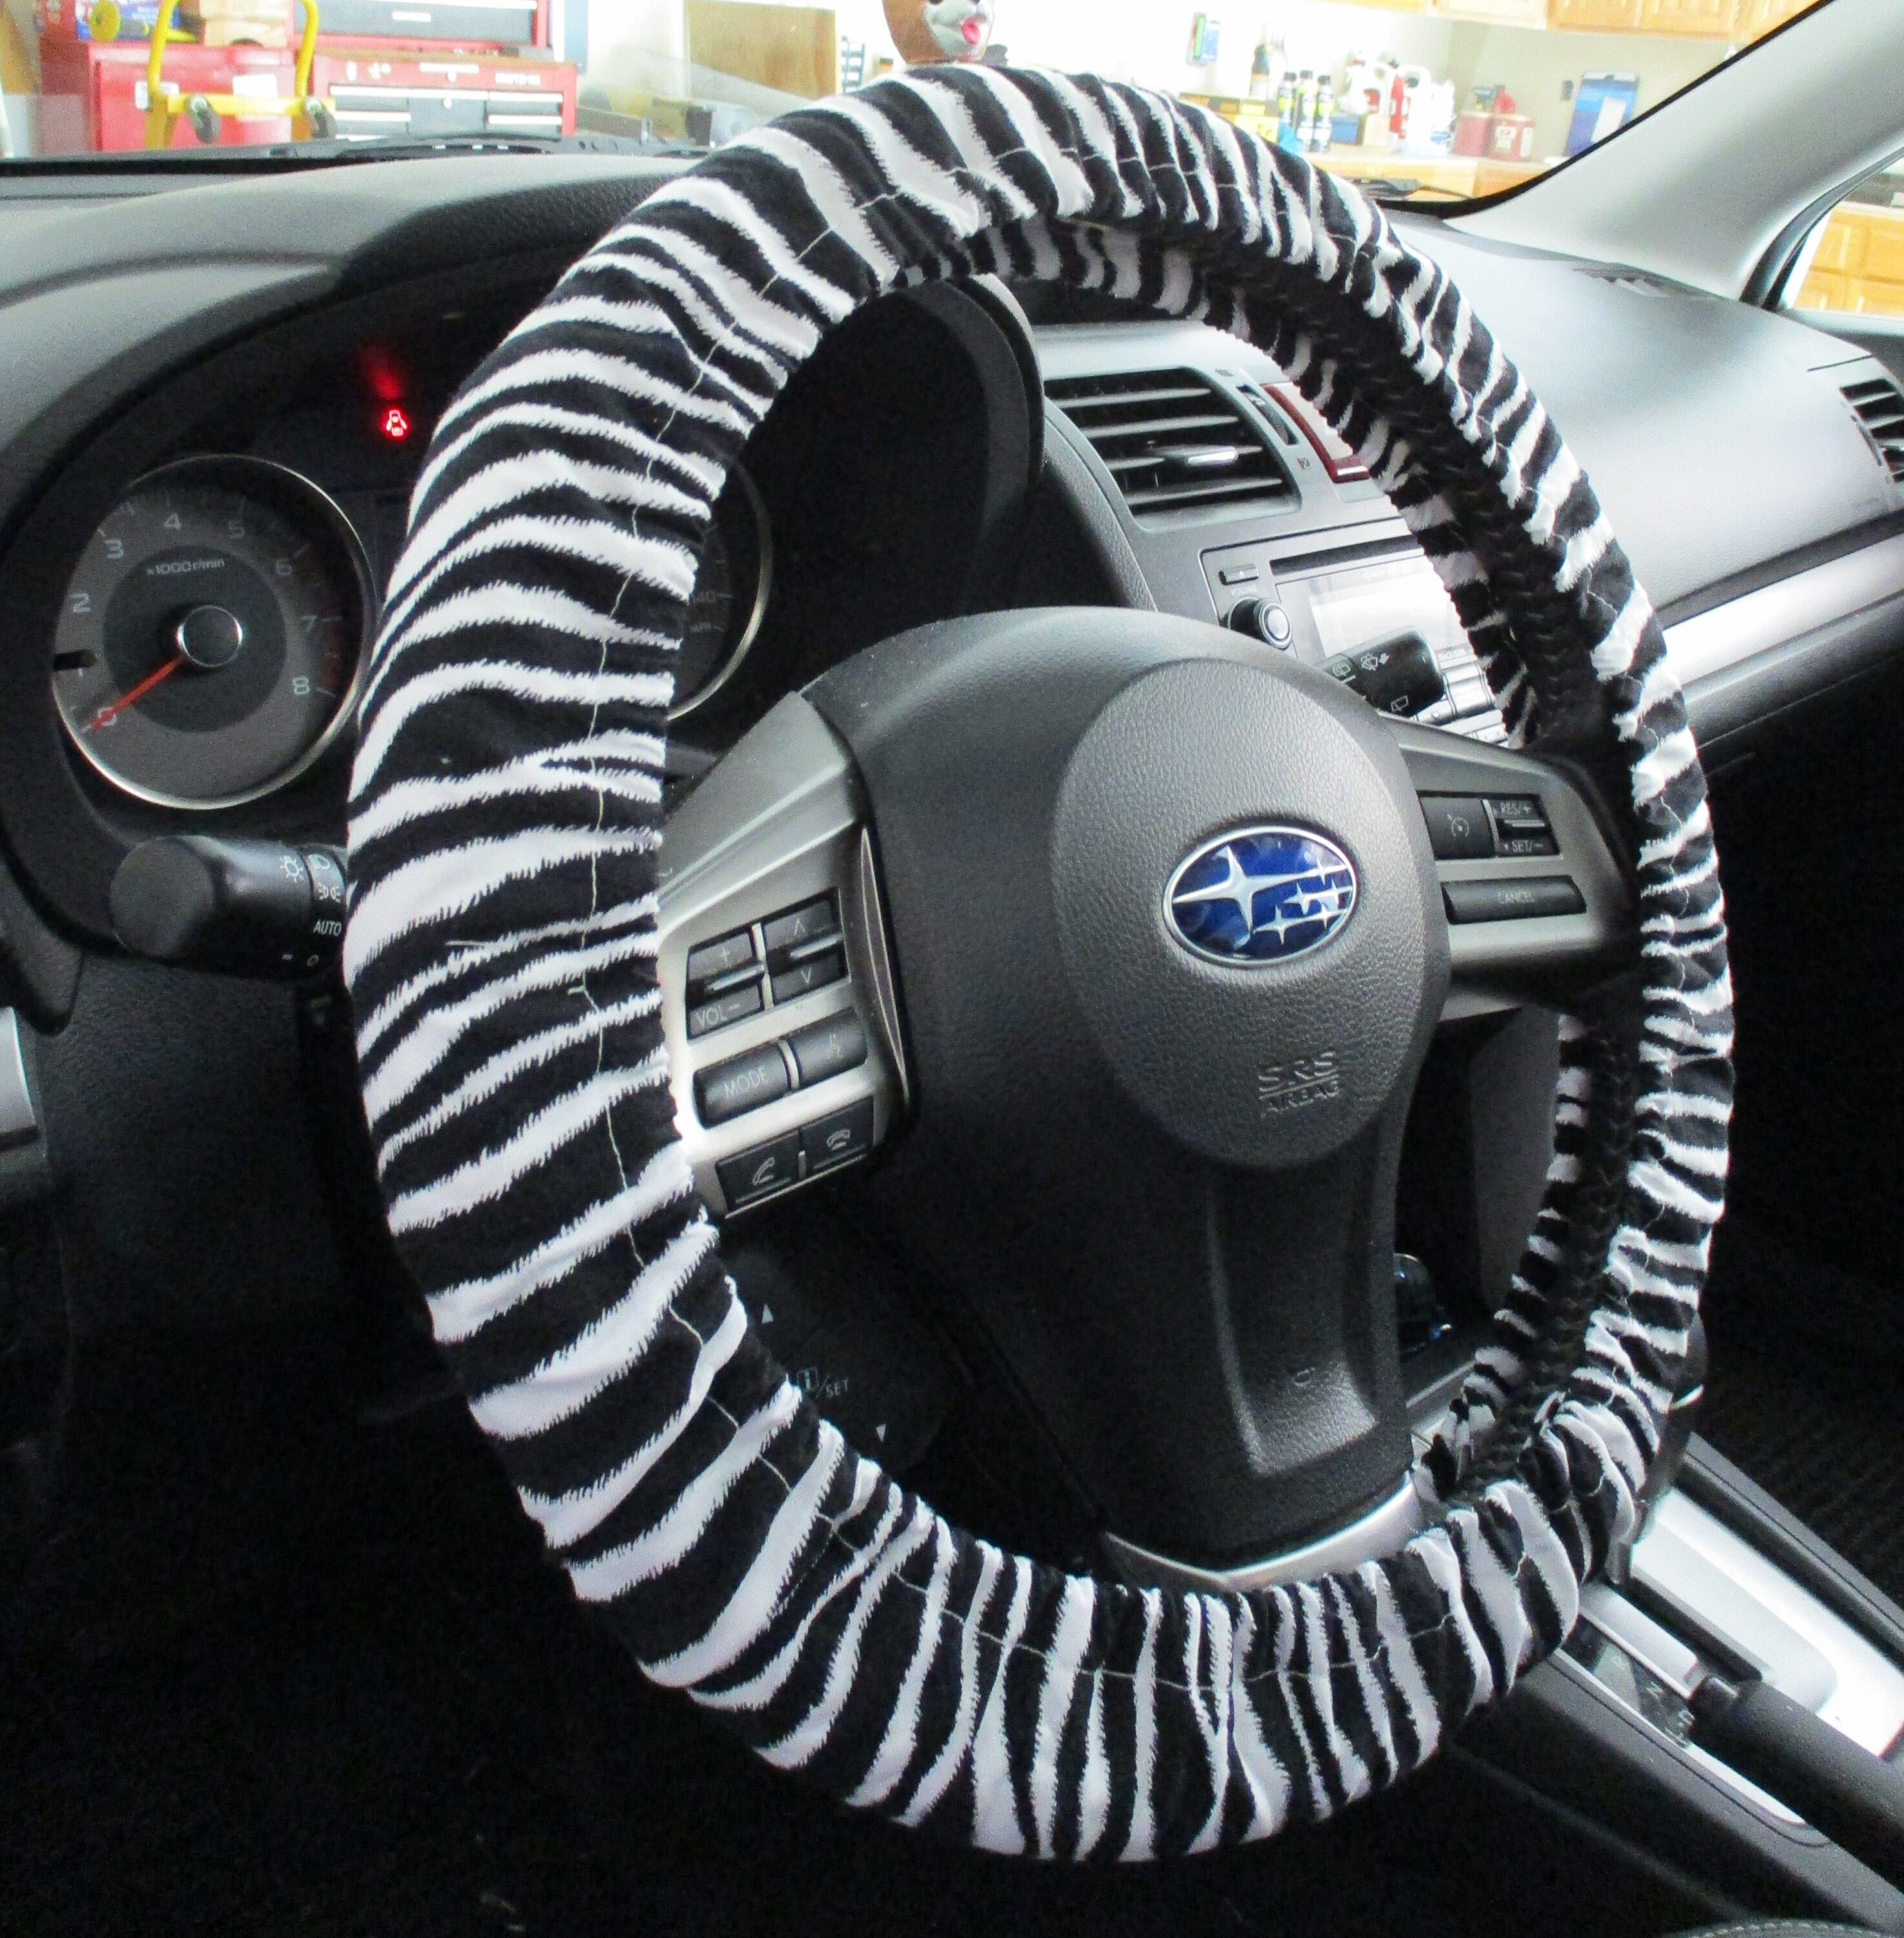 JOAIFO Black White Zebra Stripe Car Car Steering Wheel Covers Cloth with Vehicle Seatbelt Cover Protect Your Shoulder Hand Accessories for SUV Sedan 